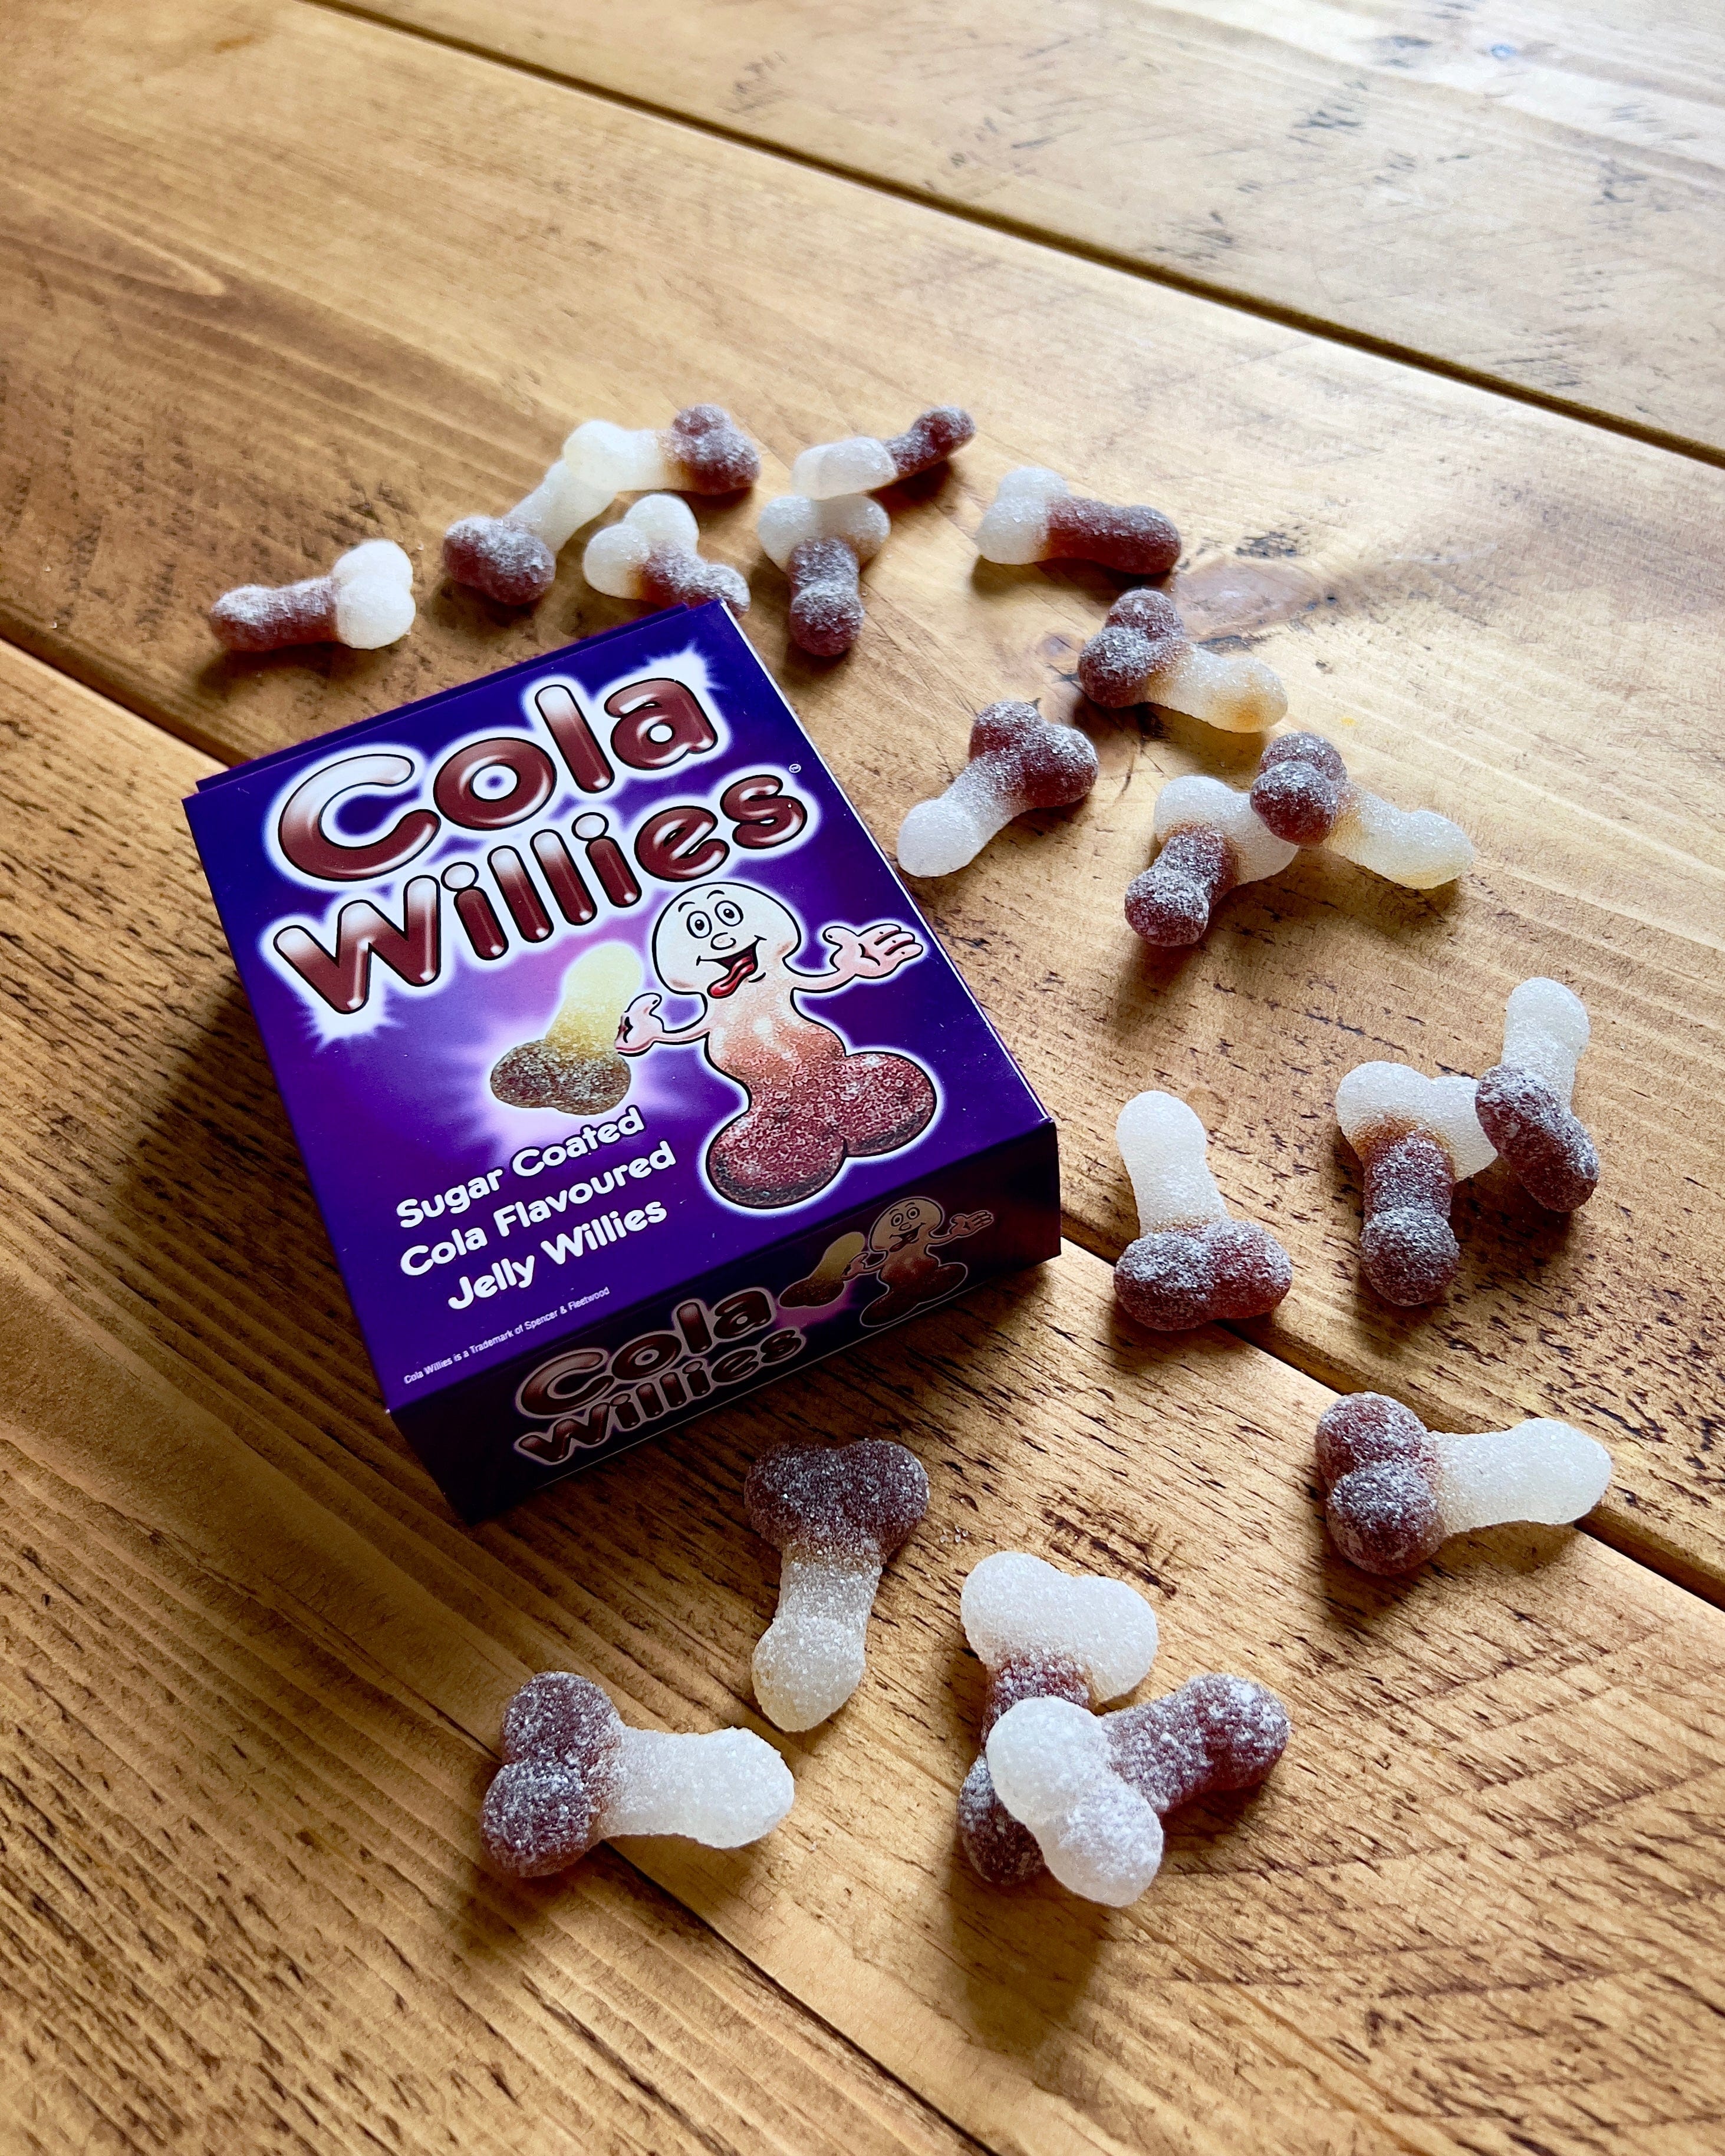 Cola willies - novelty adult sweets